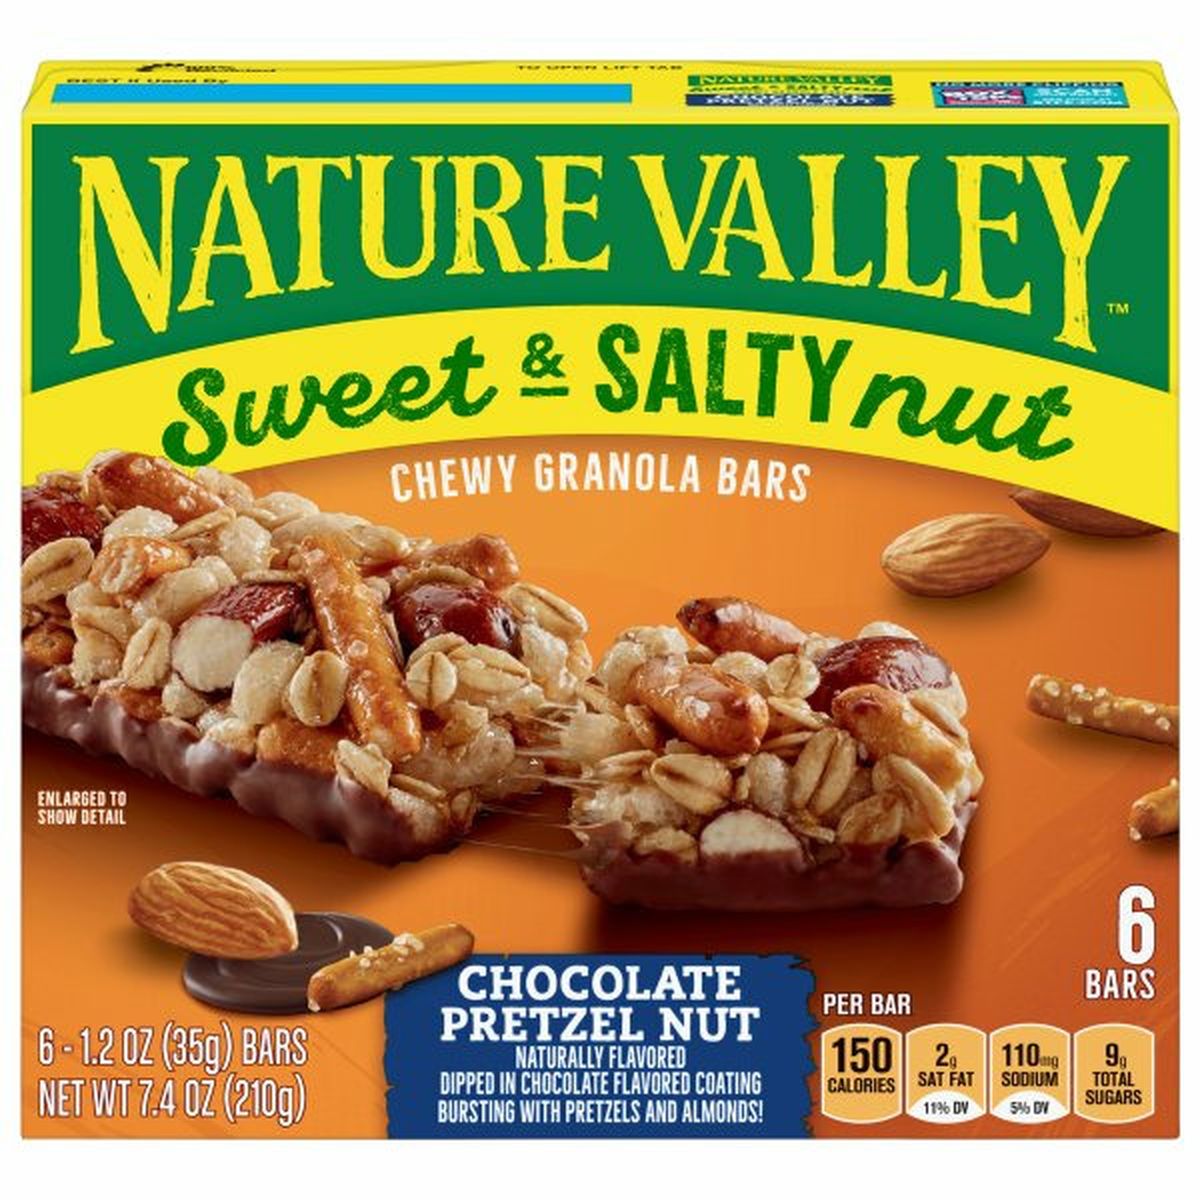 Calories in Nature Valley Granola Bars, Chocolate Pretzel Nut, Sweet & Salty Nut, Chewy